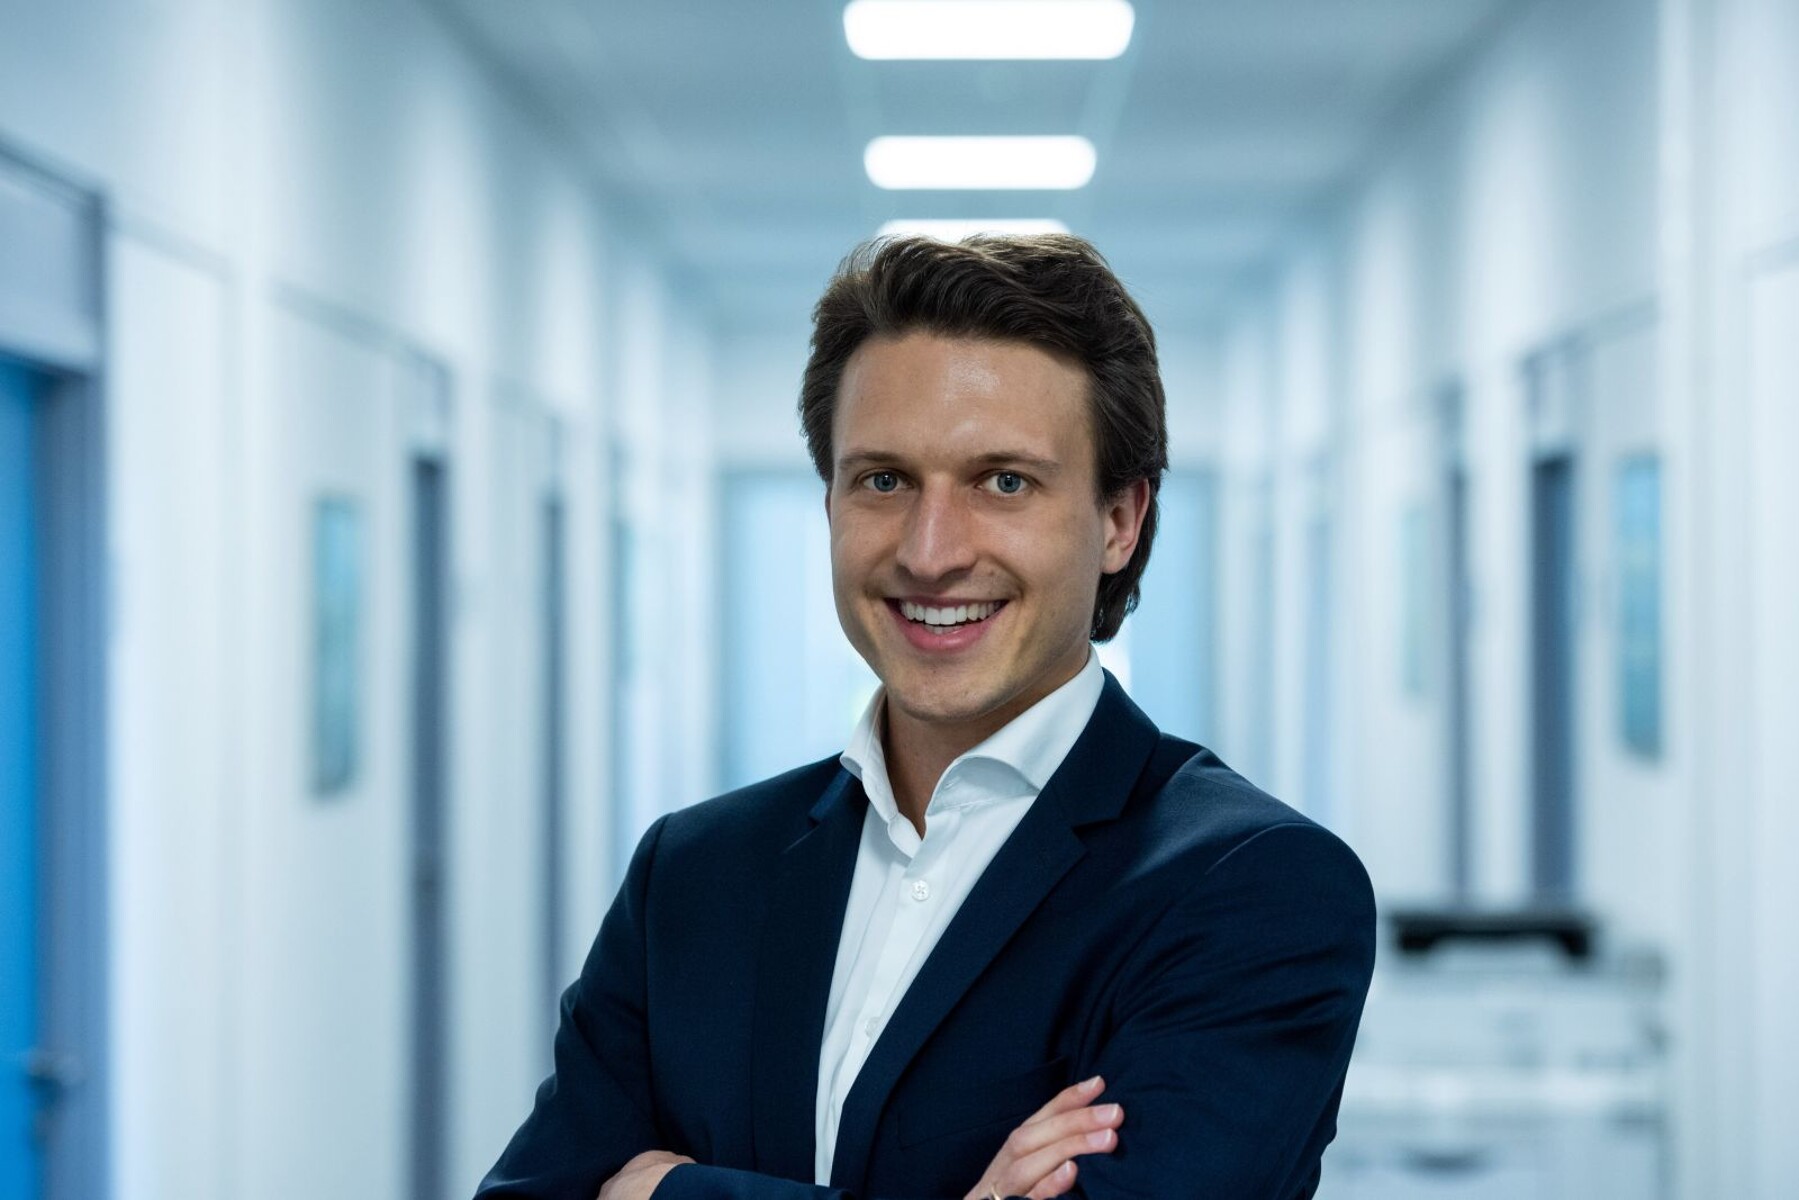 Xaver Hauser, Global Happiness Manager at KSB, smiling in an office corridor